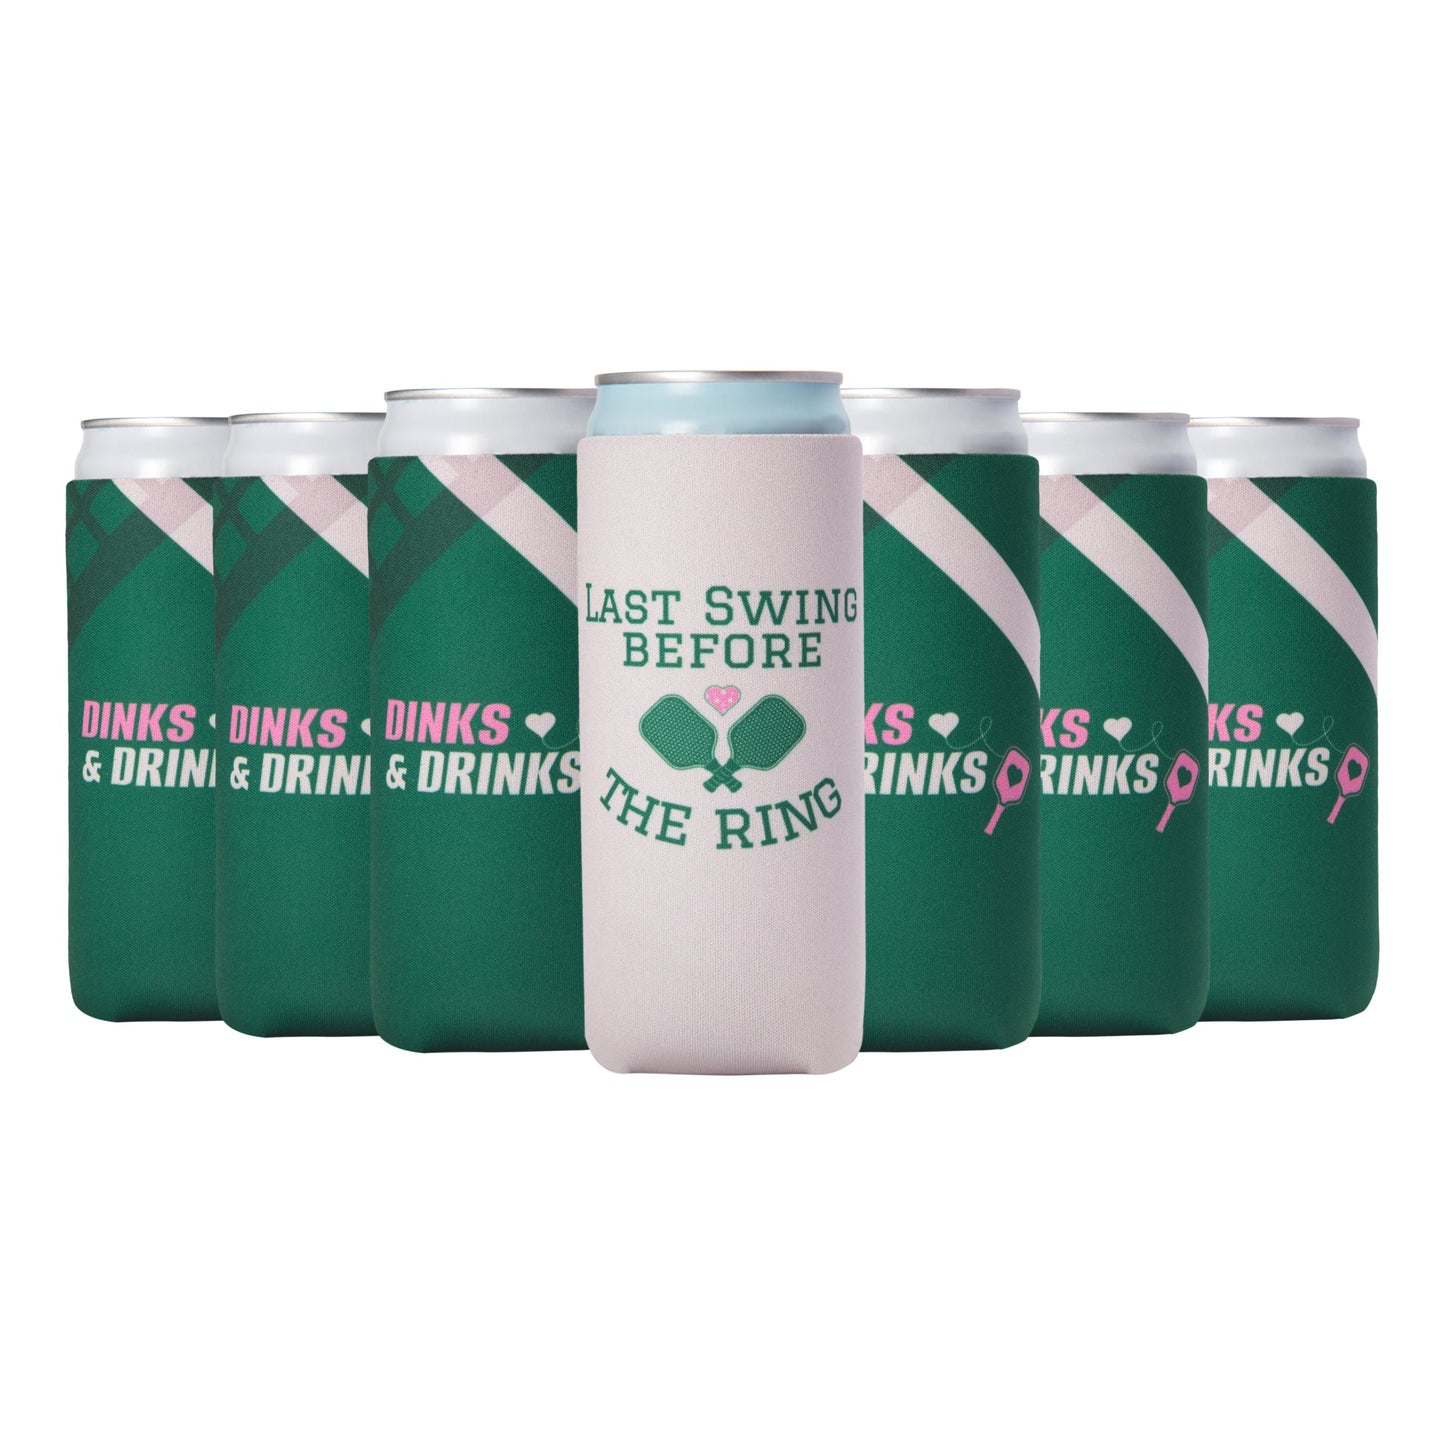 Pickleball Bachelorette Party Favors I Pickleball Themed Skinny Can Coolers Set I Last Swing Before The Ring and Dinks & Drinks Can Coolers I Bachelorette Party Gifts